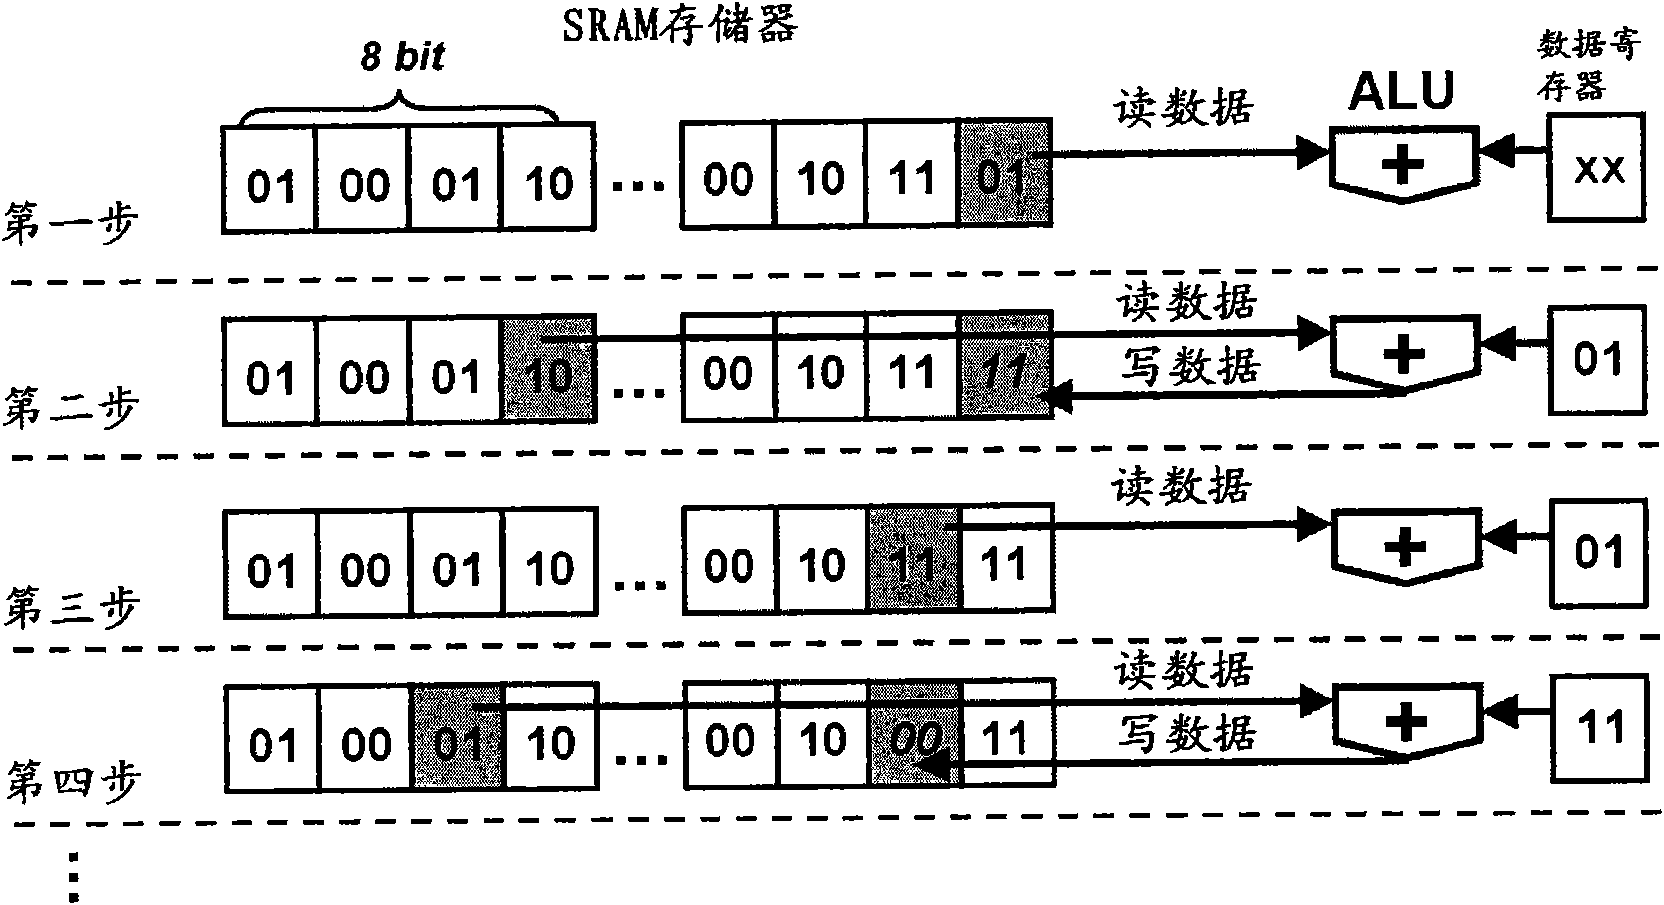 Real-time image content retrieval system and image feature extraction method